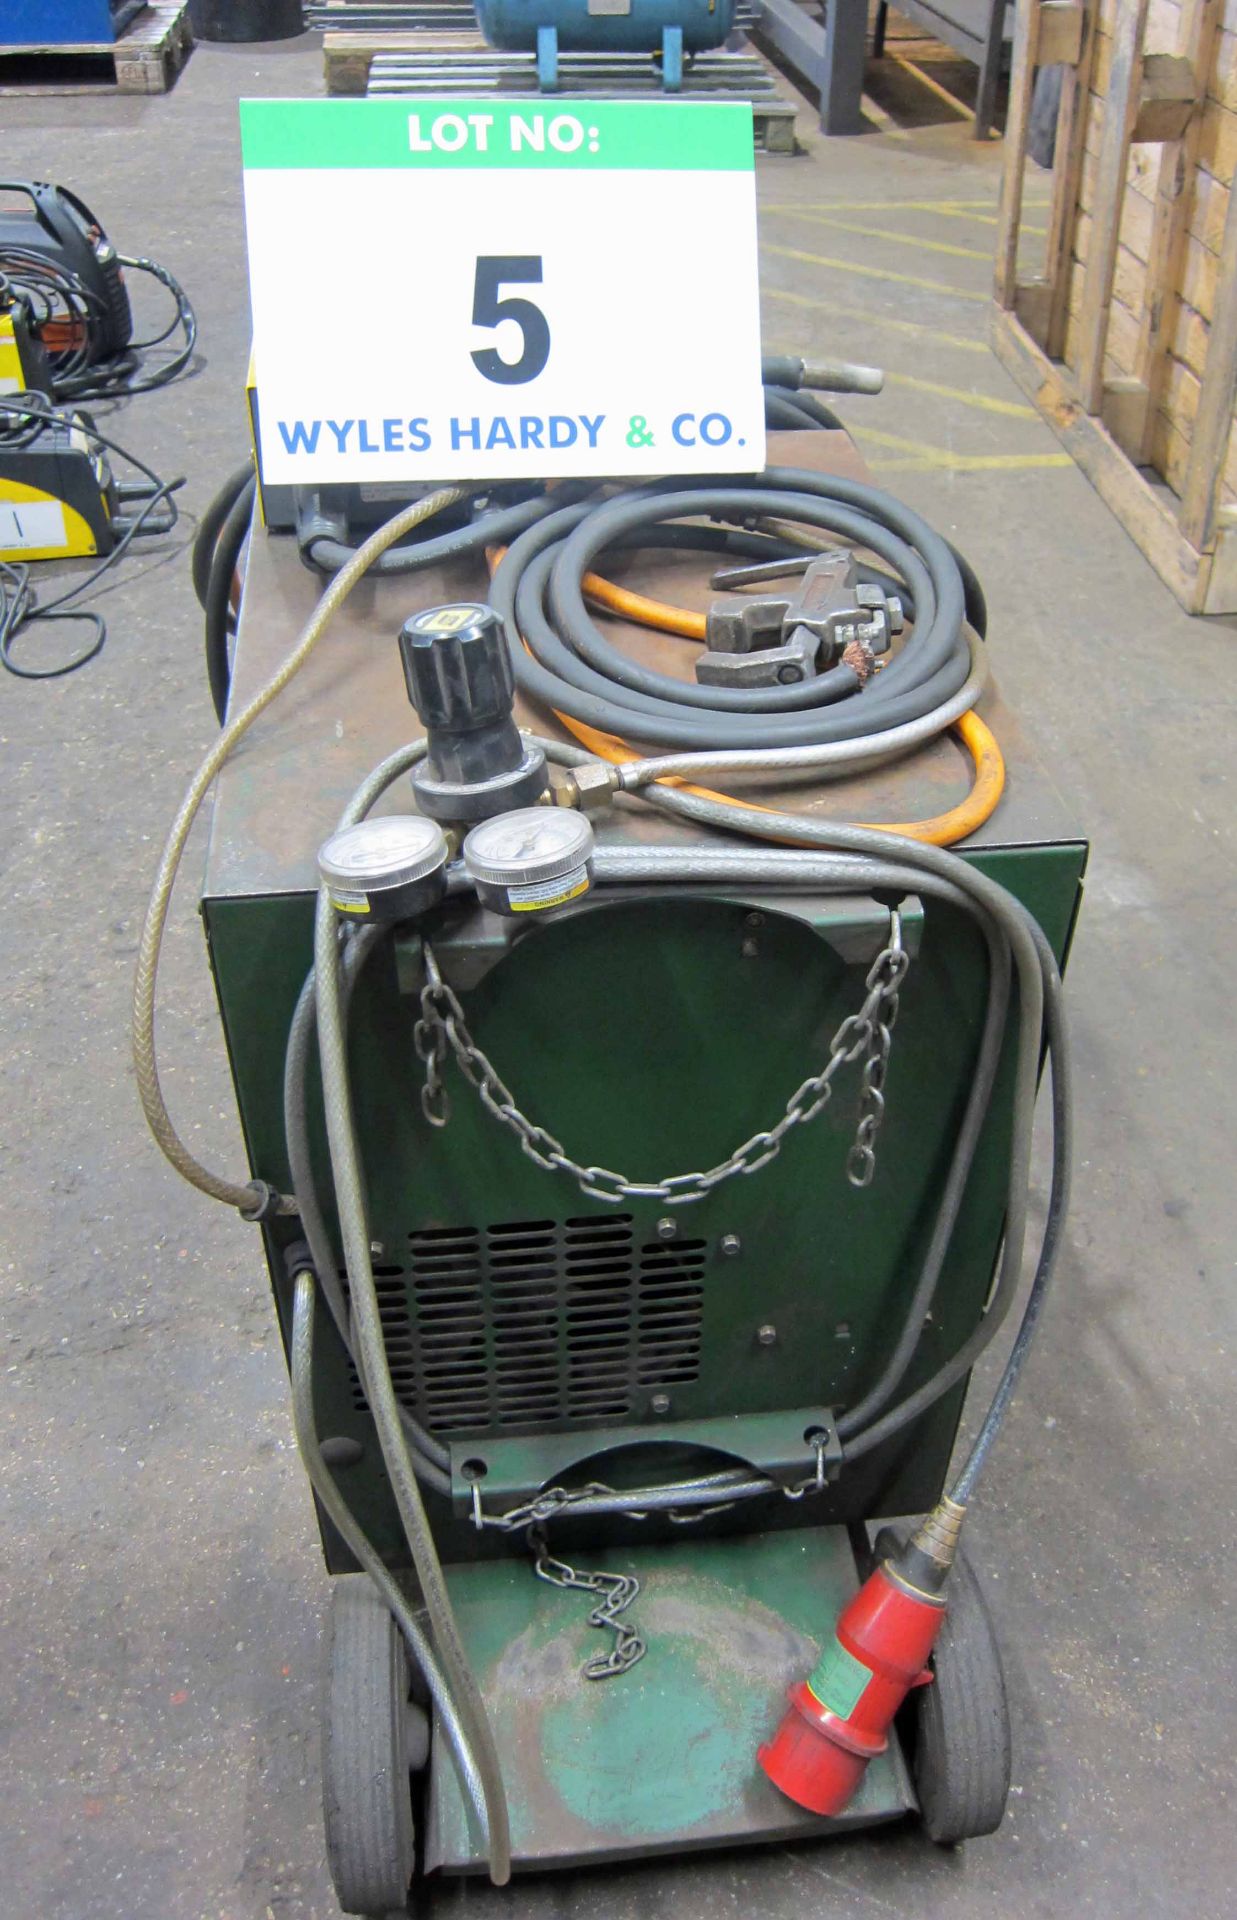 A MIGTRONIC Model Mig 300 Mig Welder complete with QUALITRONICS Voltage and Amp Meters and Gun, - Image 3 of 6